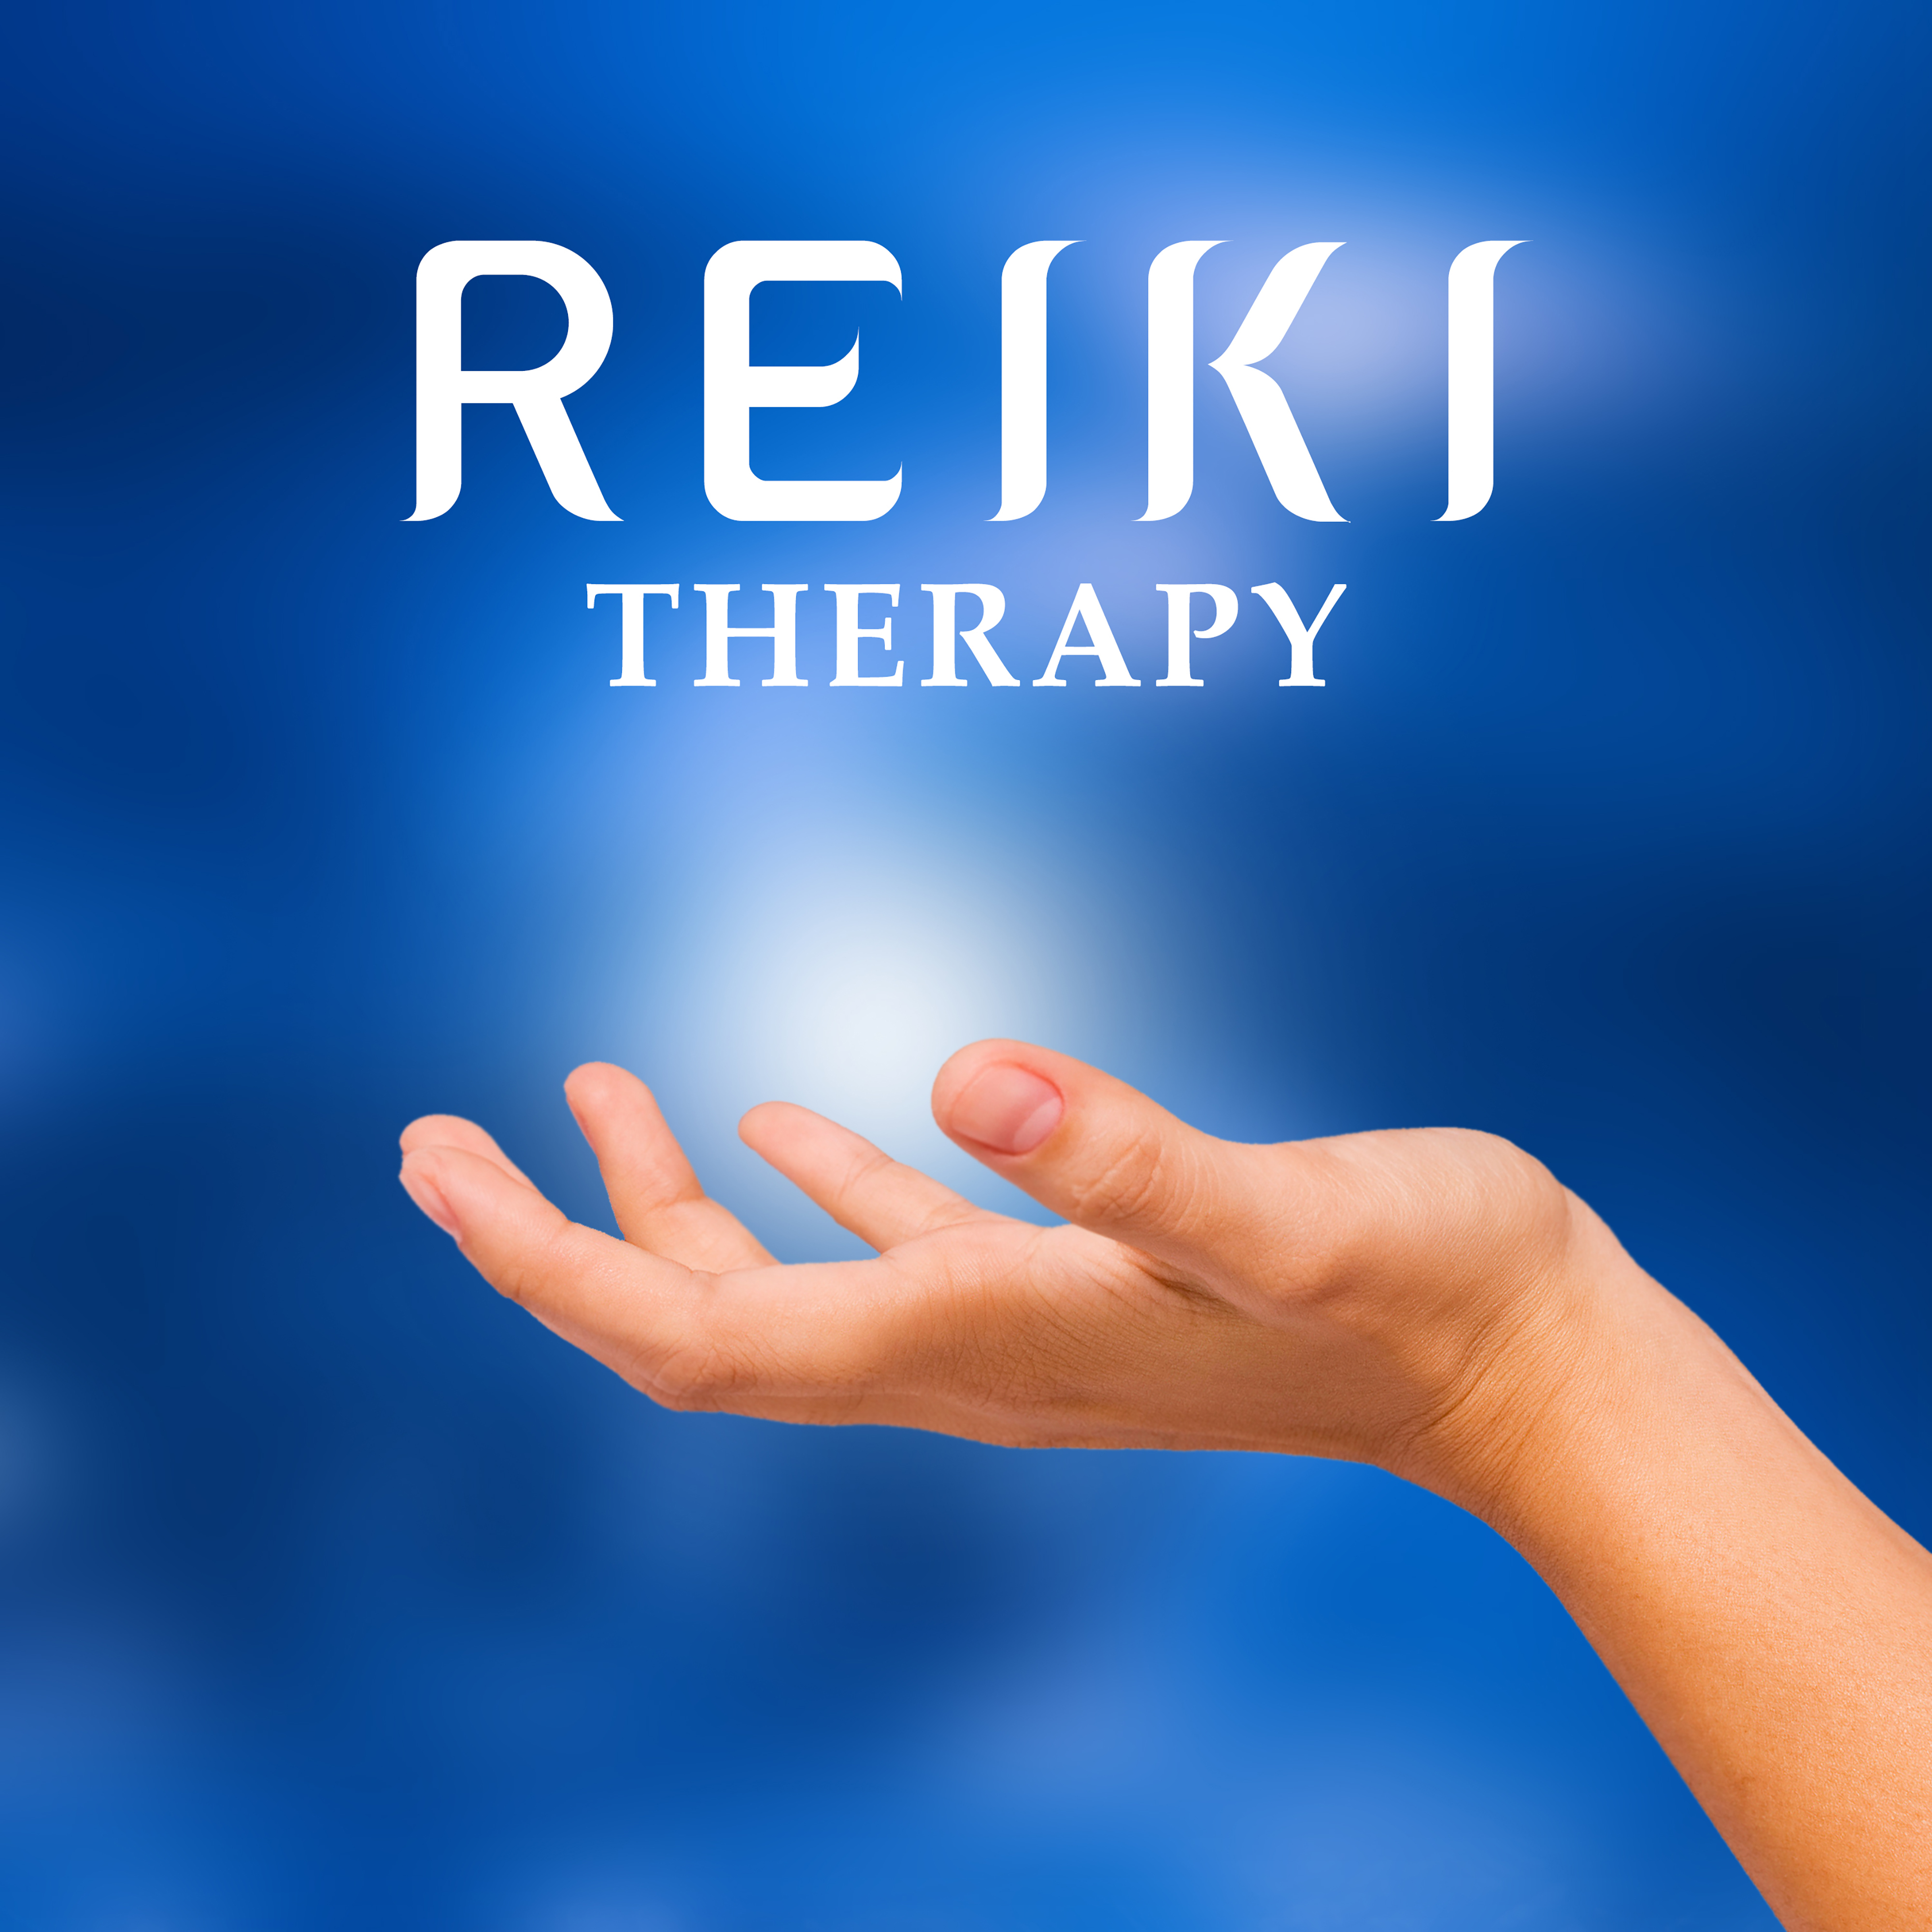 Reiki Therapy – Meditation Music, Deep Focus, Relaxation Waves, Oriental Flute, Soothing Guitar, Nature Sounds for Better Concentration